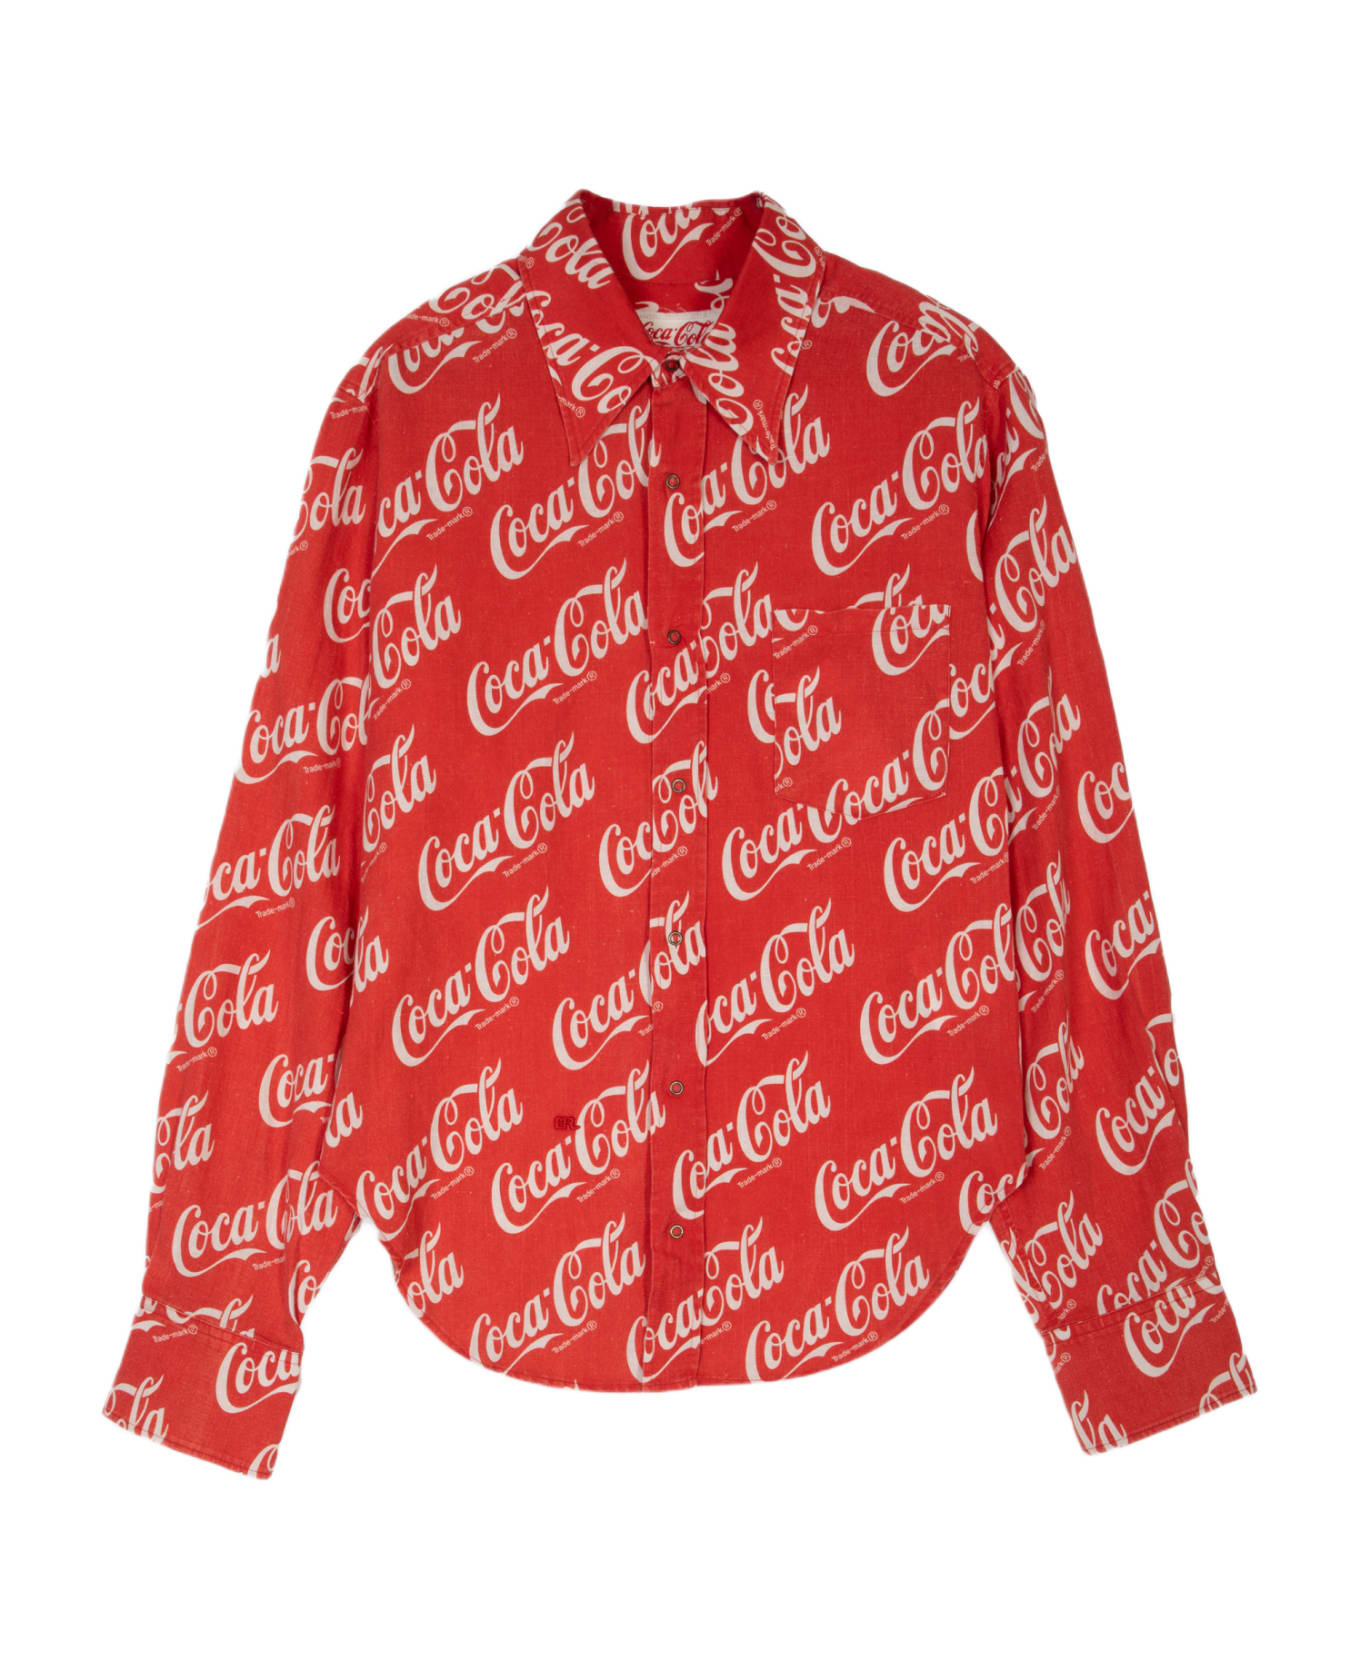 ERL Unisex Printed Button Up Shirt Woven Red linen blend Coca Cola shirt - Unisex Printed Button Up Shirt Woven - Rosso シャツ